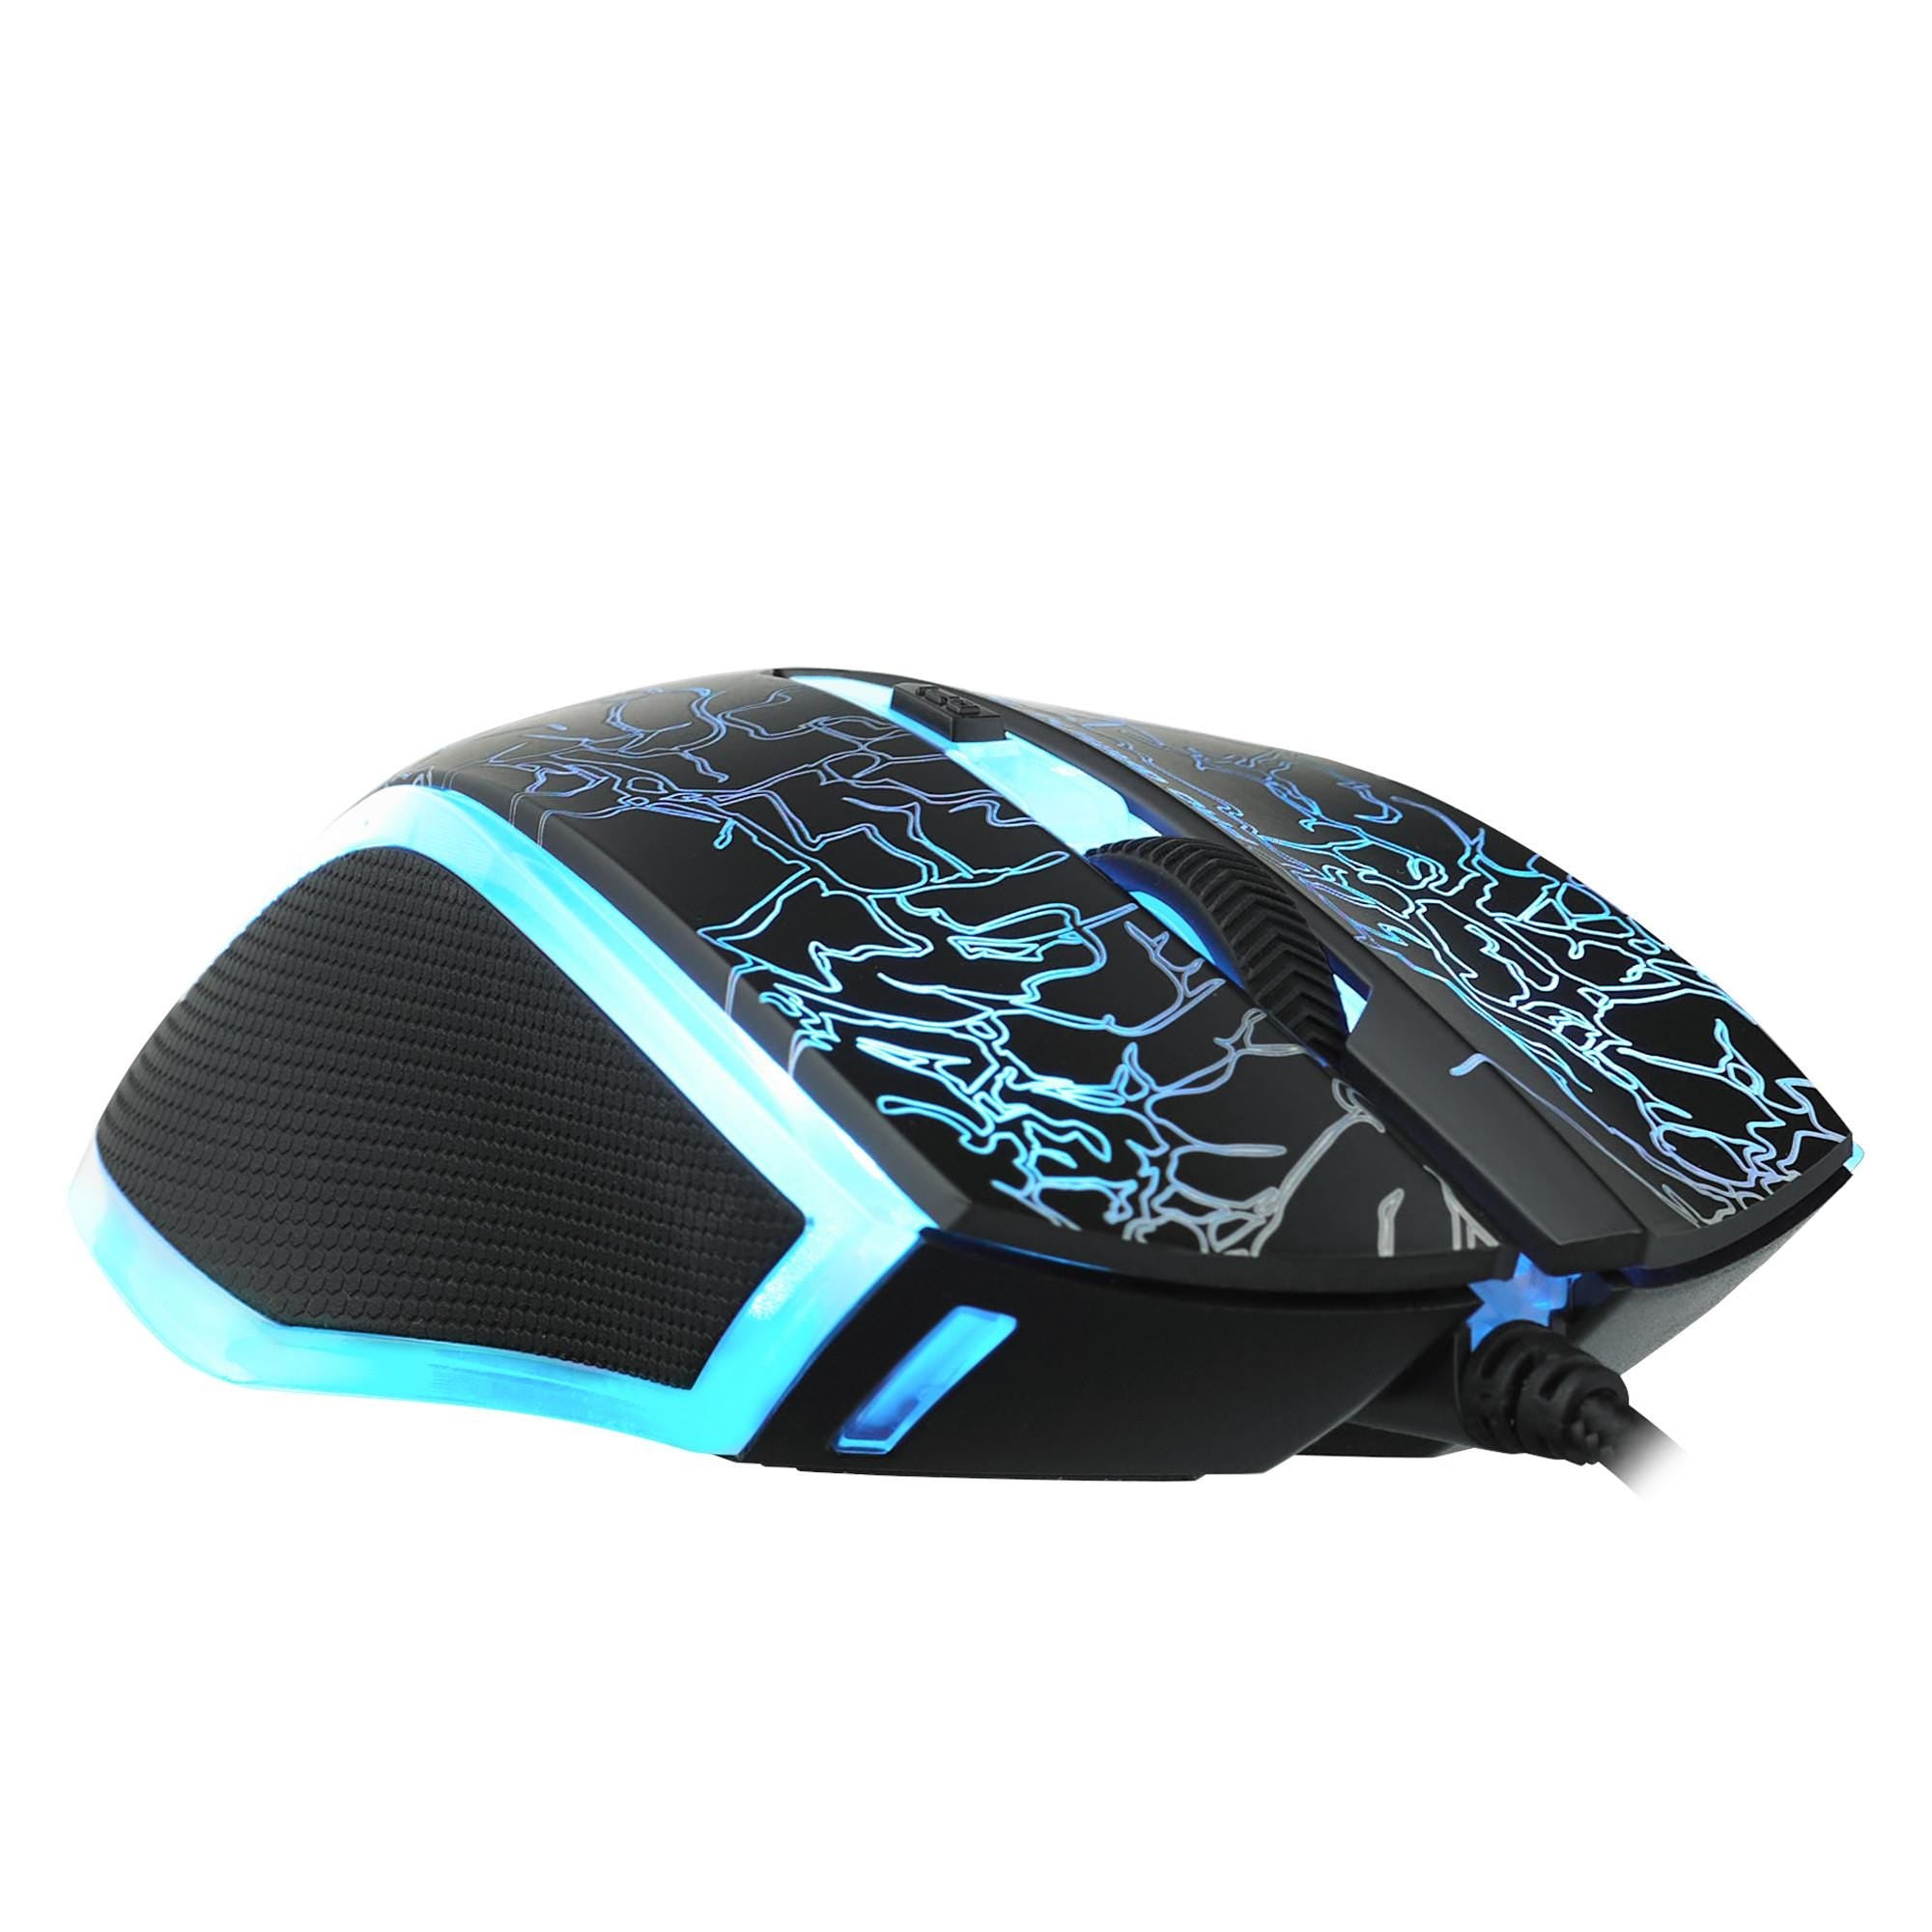 Rapoo V20S 5-Button RGB Optical Gaming Mouse